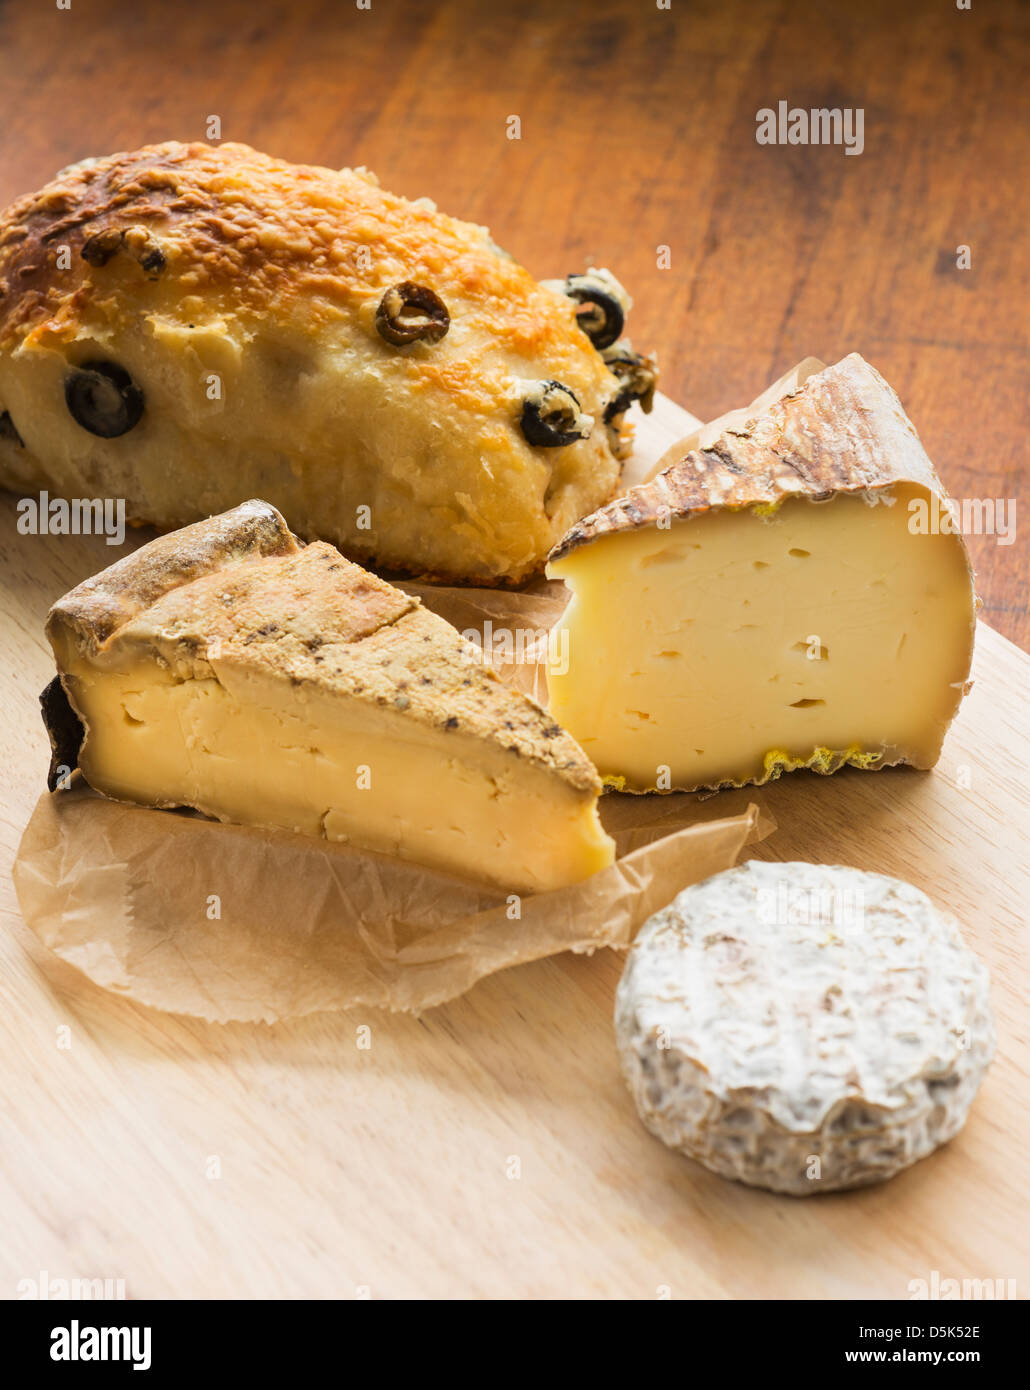 French cheese and olive bread Stock Photo